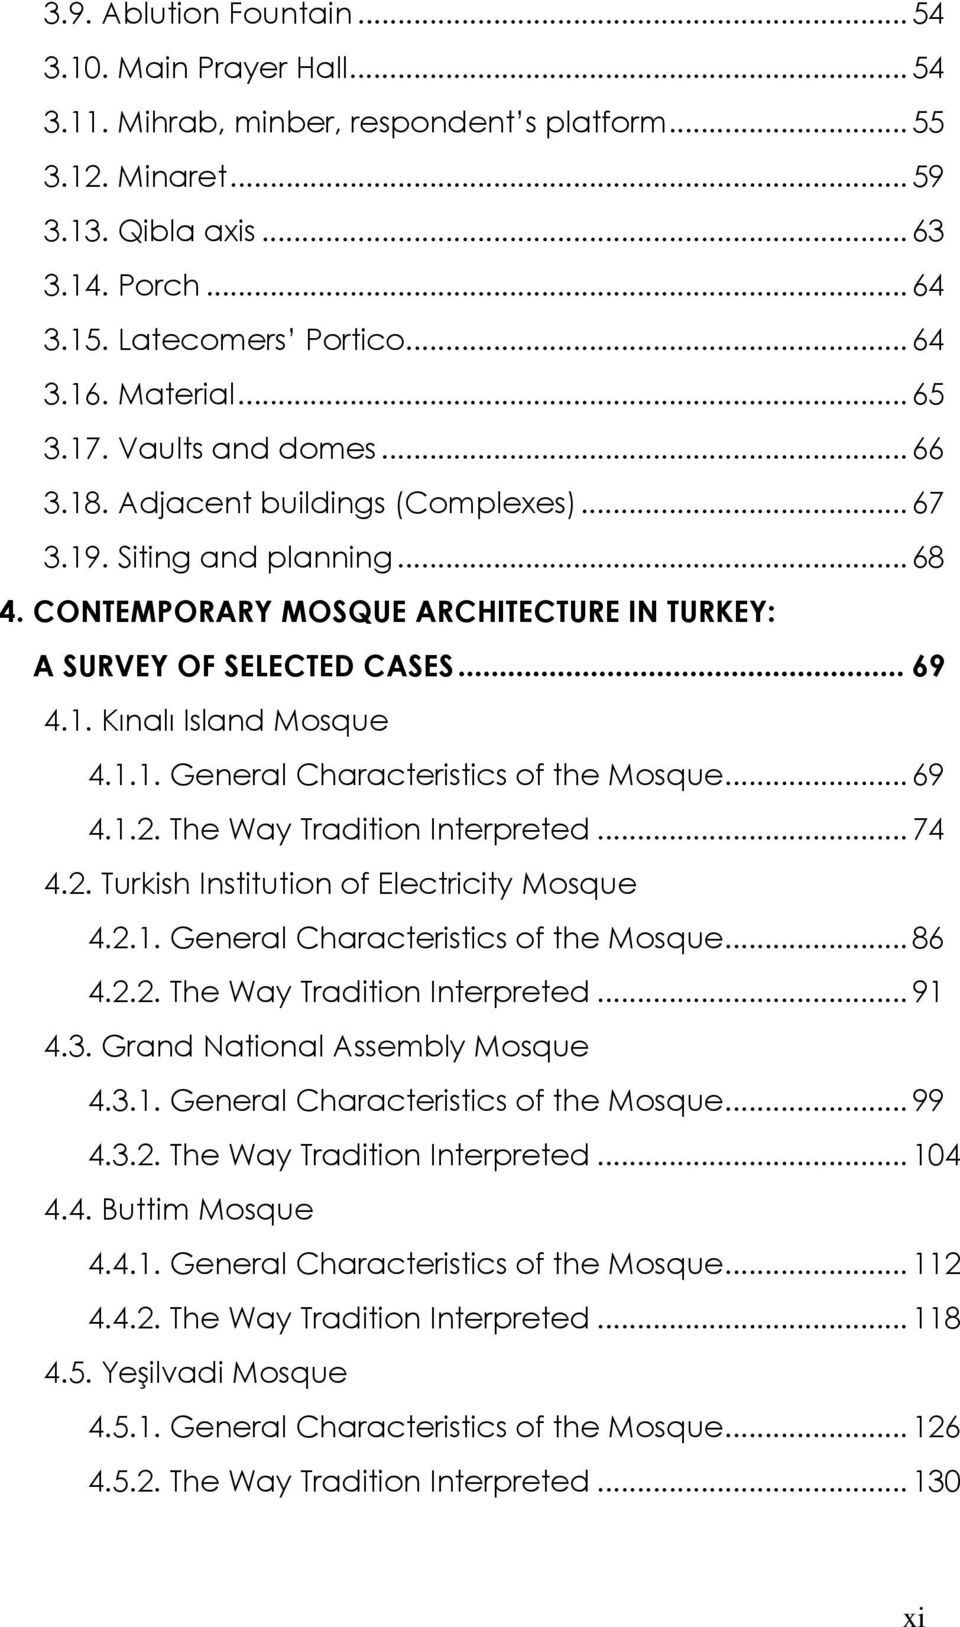 1.1. General Characteristics of the Mosque...69 4.1.2. The Way Tradition Interpreted...74 4.2. Turkish Institution of Electricity Mosque 4.2.1. General Characteristics of the Mosque...86 4.2.2. The Way Tradition Interpreted...91 4.